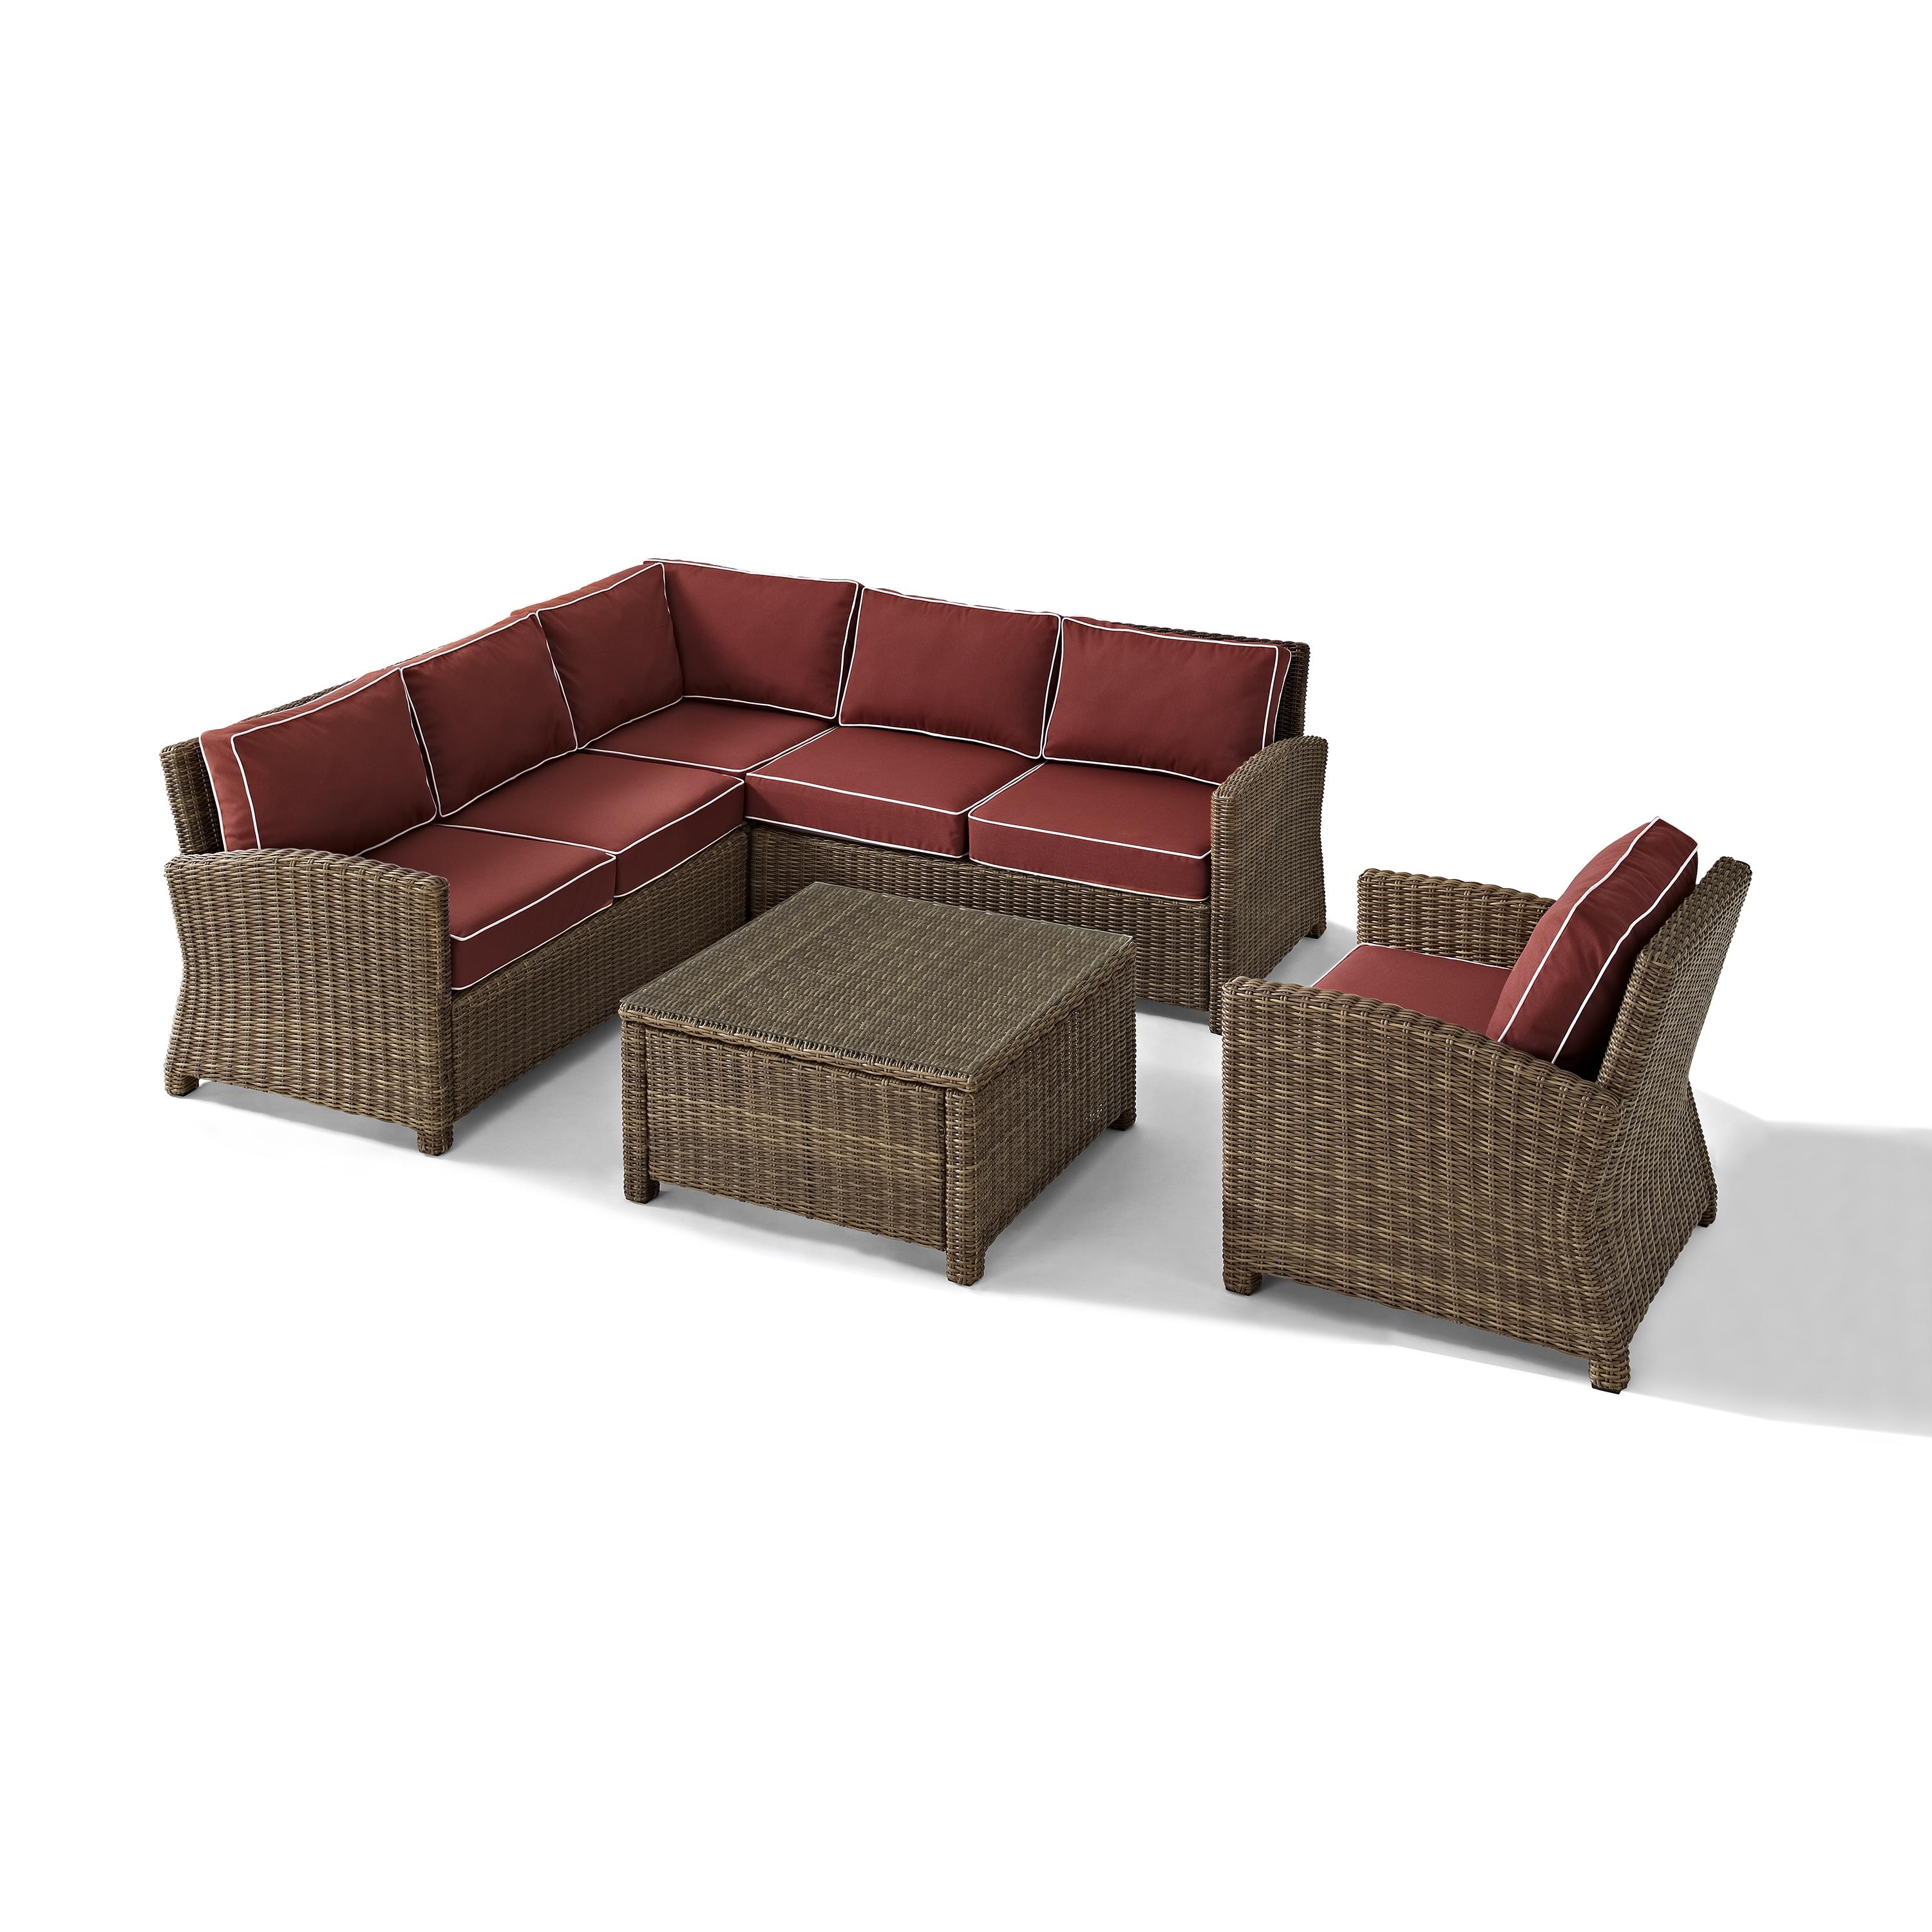 Crosley Furniture Bradenton 5 Pc Fabric Patio Sectional Set in Sangria Red - image 2 of 10